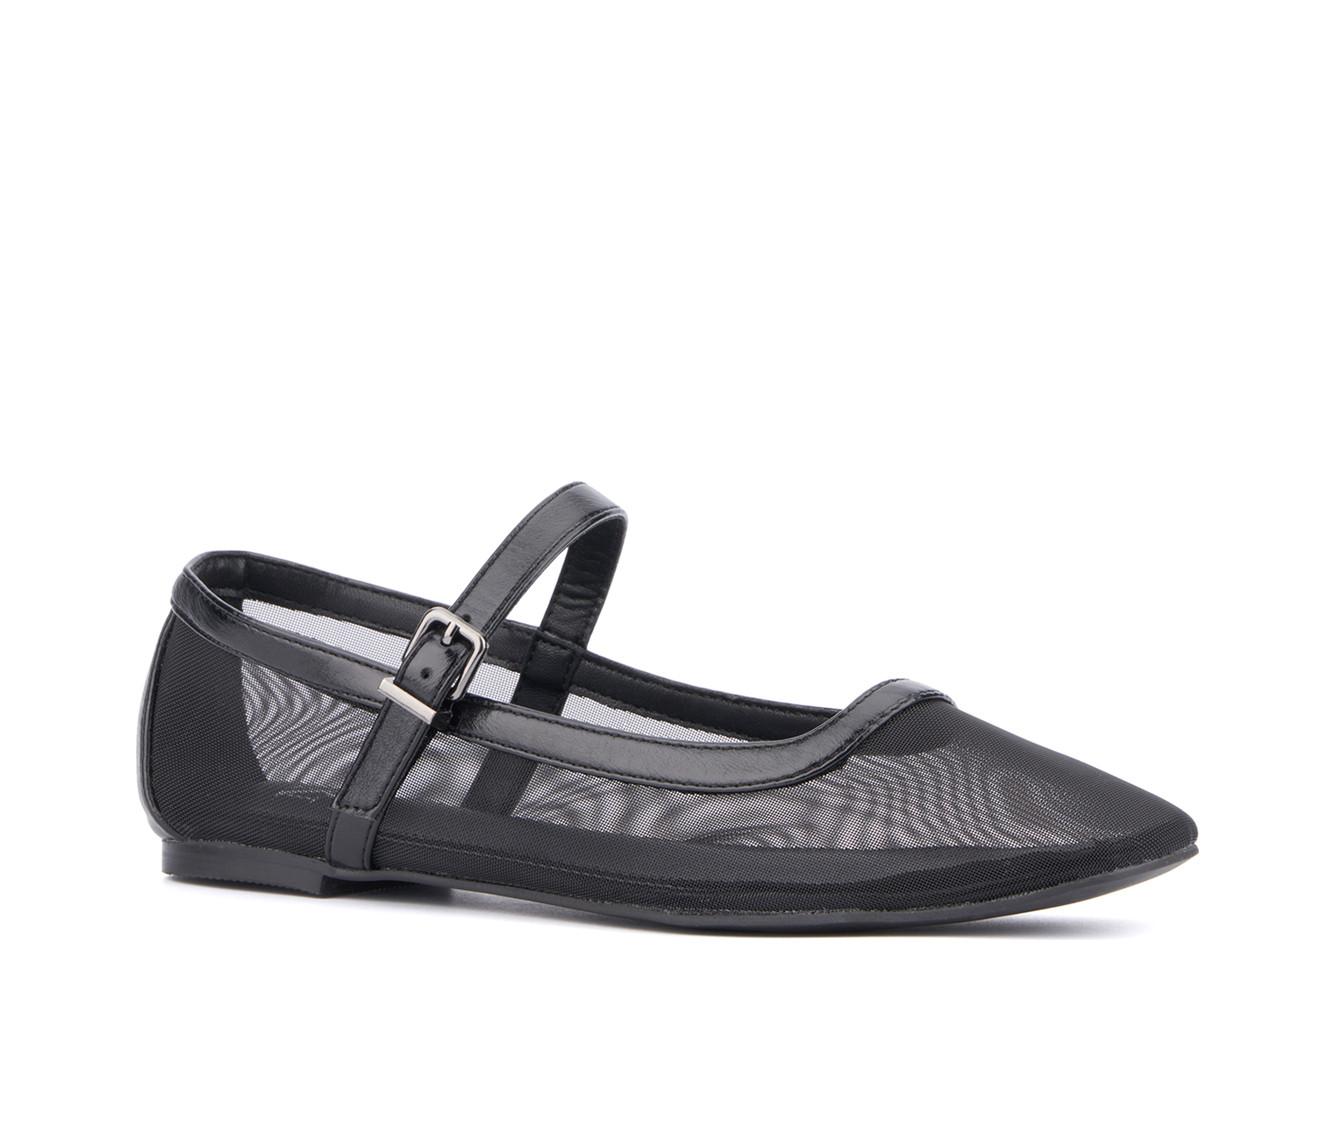 Women's New York and Company Page 2 Mary Jane Flats